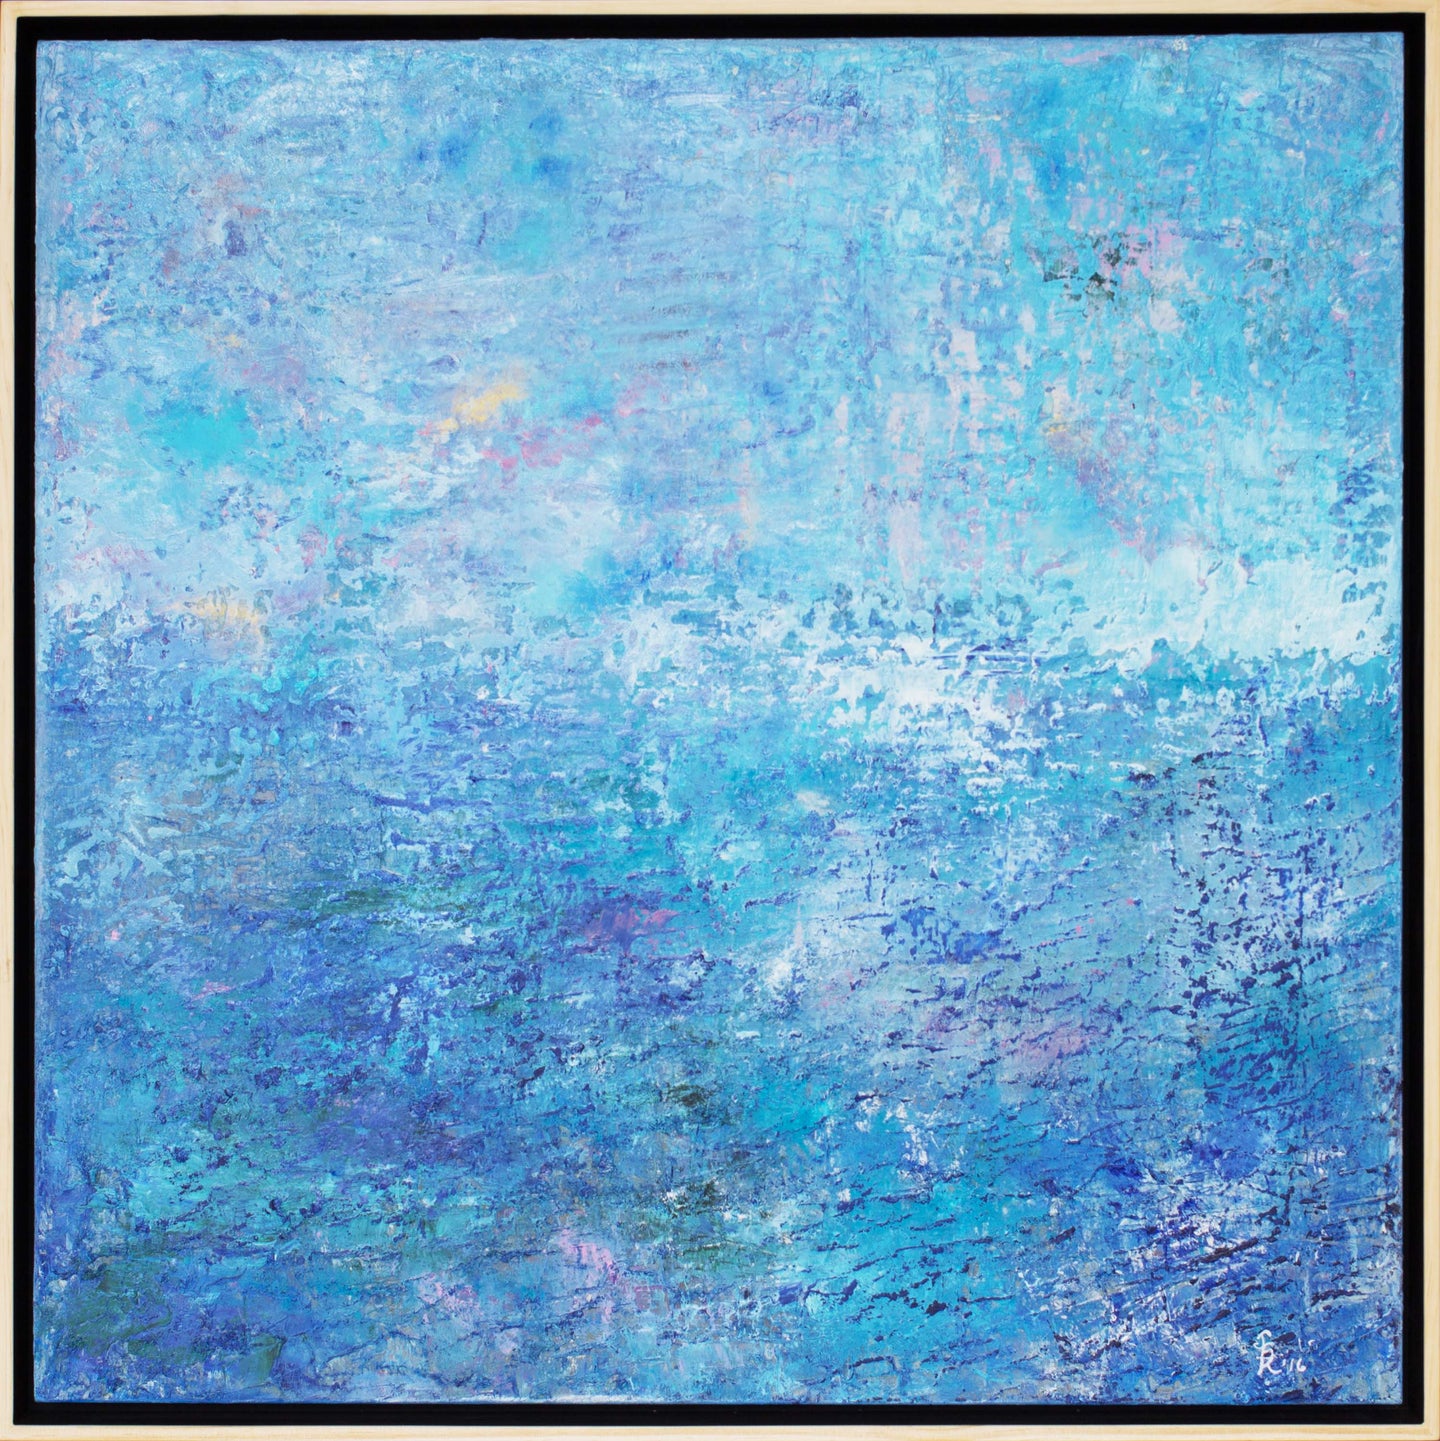 Jill Krutick Beach Day, 2016 Oil on Canvas  40 x 40 inches 42 x 42 inches framed Beach Day is an abstract impressionistic work inspired by Monet’s Water Lilies. Heavily layered and textured, this piece attempts to capture the beauty of the high seas in all its splendor. Featuring washes of blues and other cool colors, the compositional design is reminiscent of a special day at sea. At Manoli Projects gallery in Miami, FL